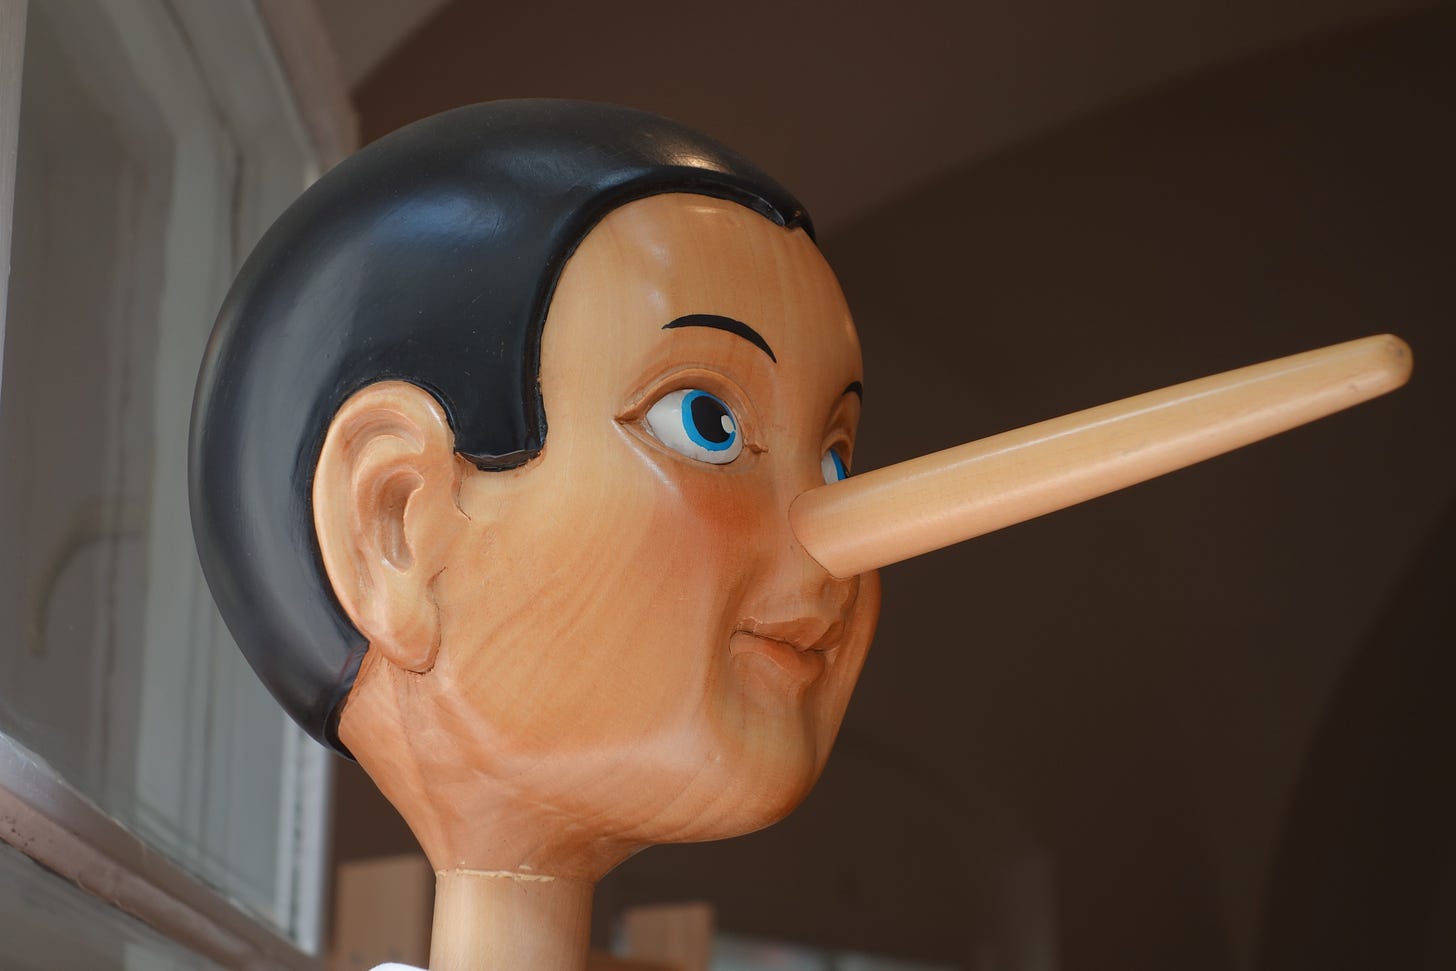 A photo of a wooden pinocchio doll.